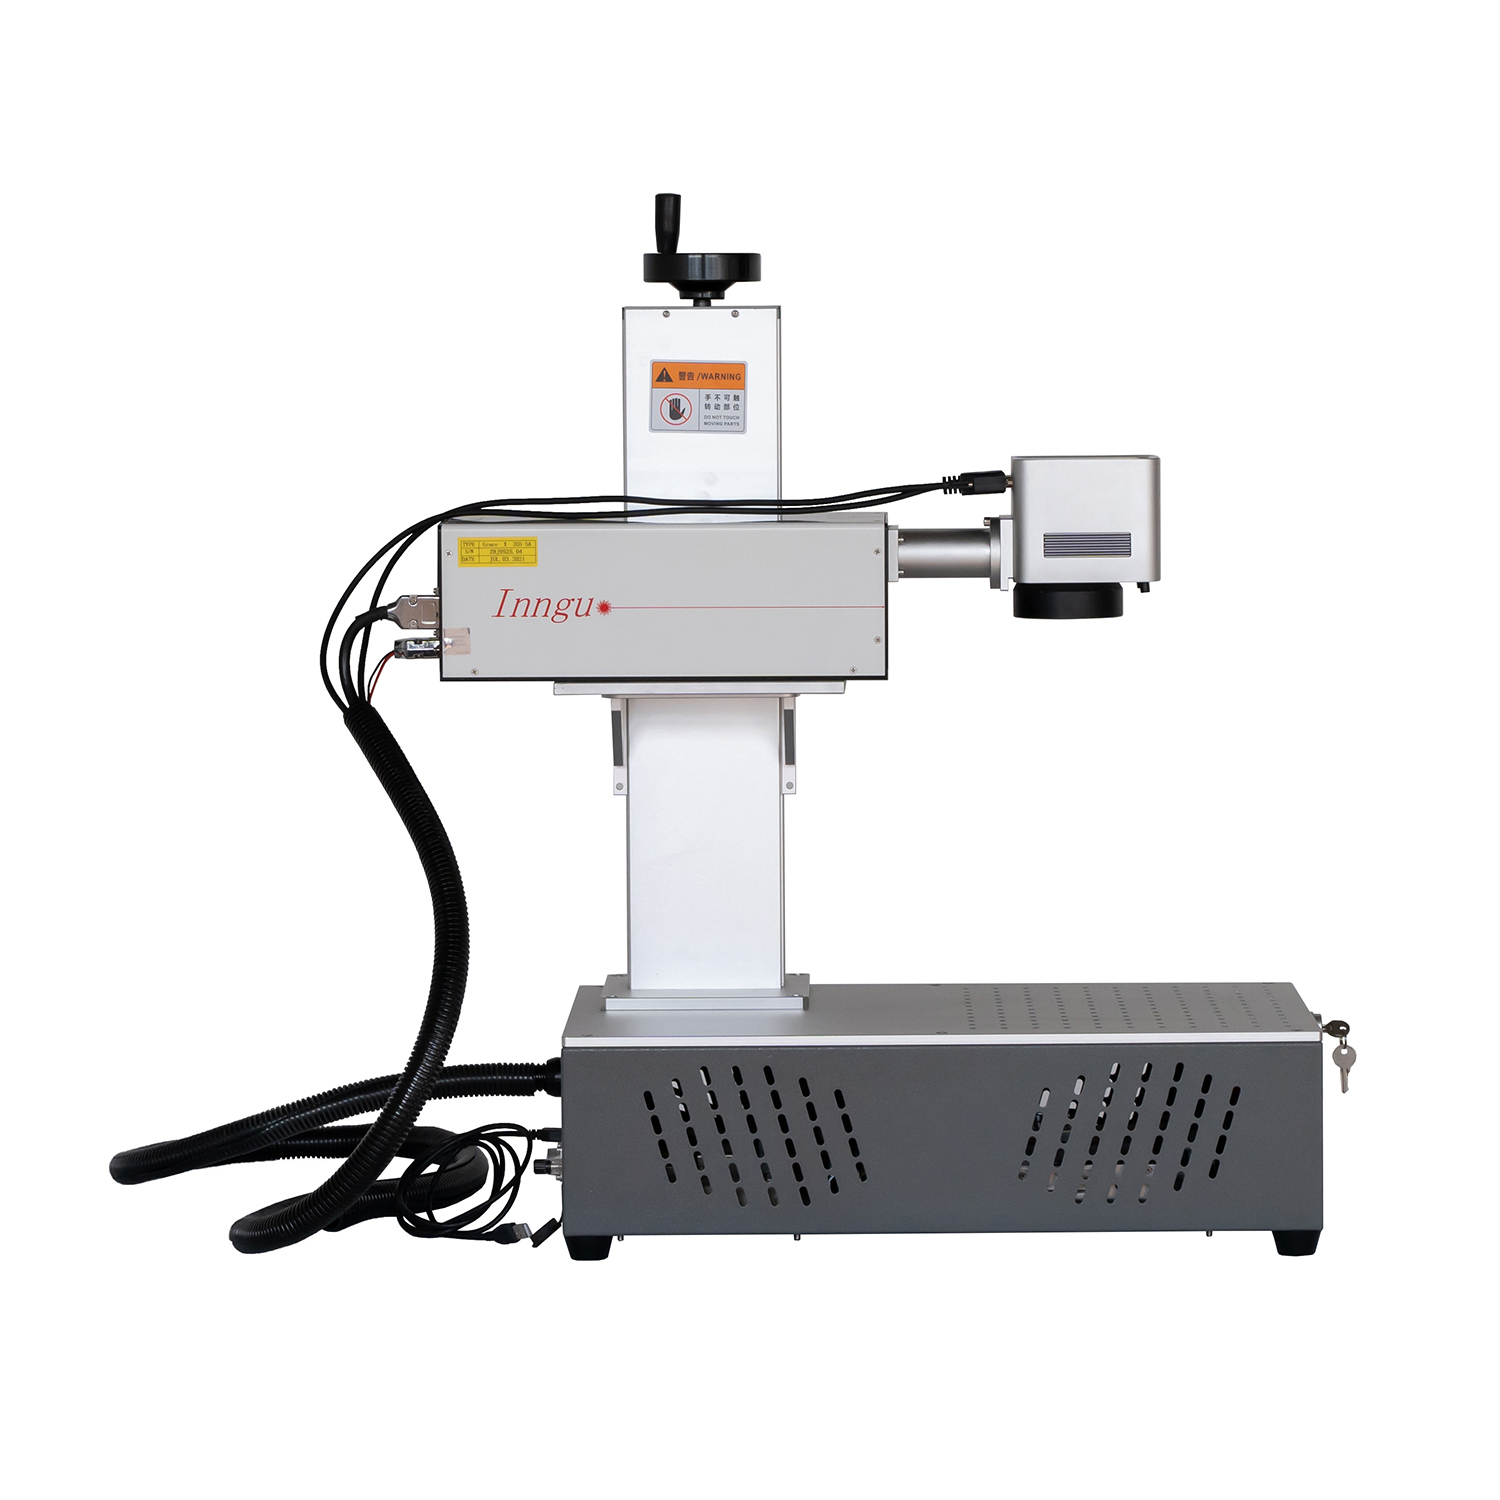 All-in-one Small Style Air Cooling 3W 5W UV Laser Marking Engraving Printing Machine